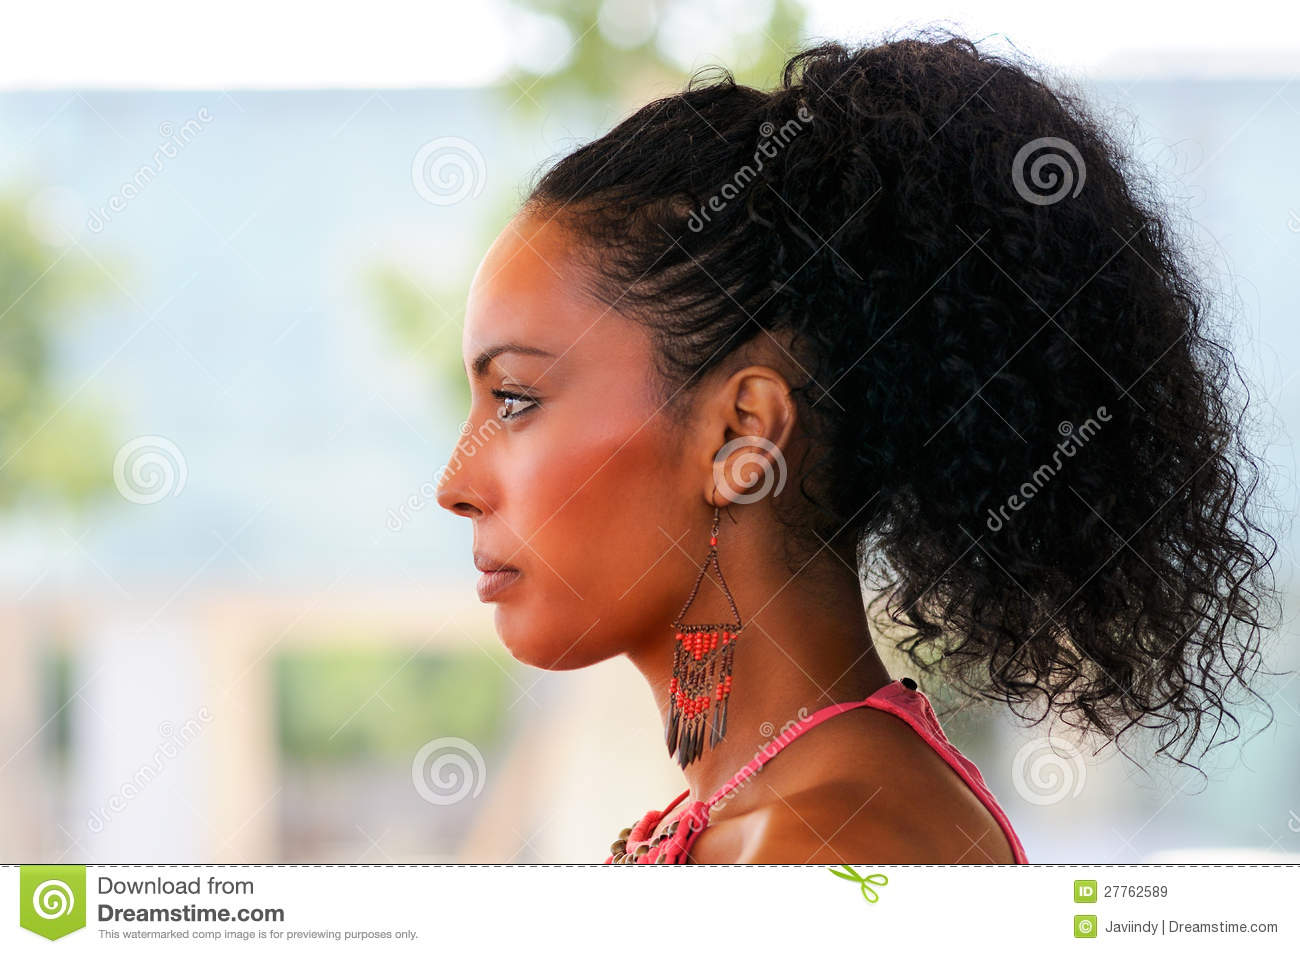 Black Woman With Earrings  Afro Hairstyle Royalty Free Stock Images    